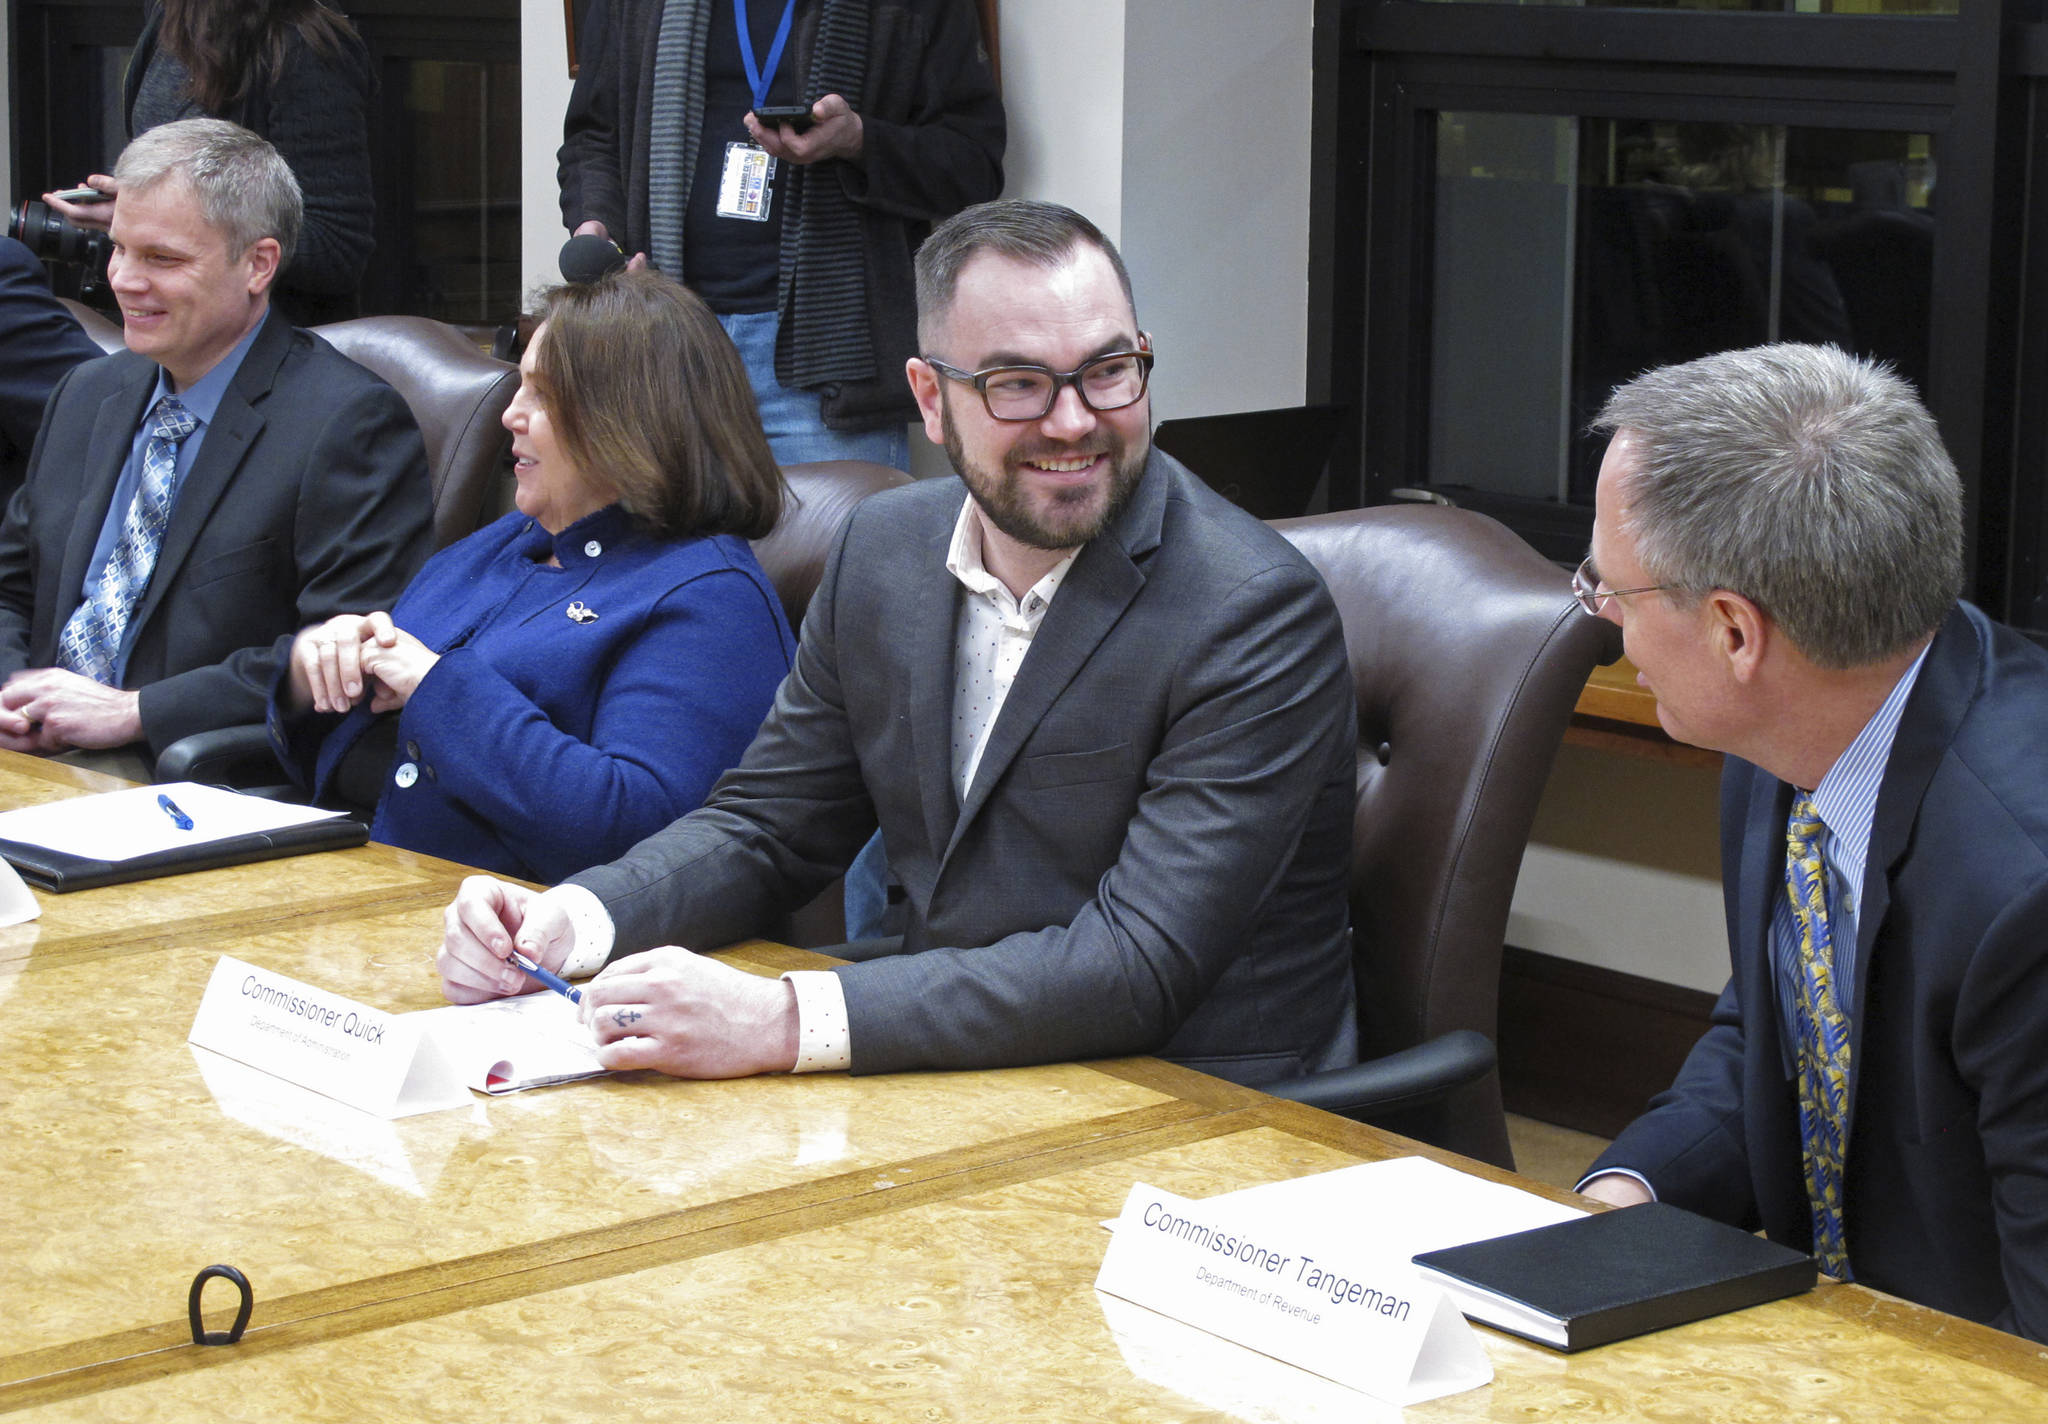 In this Jan. 8, 2019, file photo, Alaska Department of Administration Commissioner nominee Jonathan Quick, second from right, speaks with Revenue Commissioner Bruce Tangeman, right, before the start of a cabinet meeting at the state Capitol. Quick was accused of lying about his business background that he had an ownership interest in Anthem Coffee and Tea and Elements Frozen Yogurt. (AP Photo/Becky Bohrer, File)